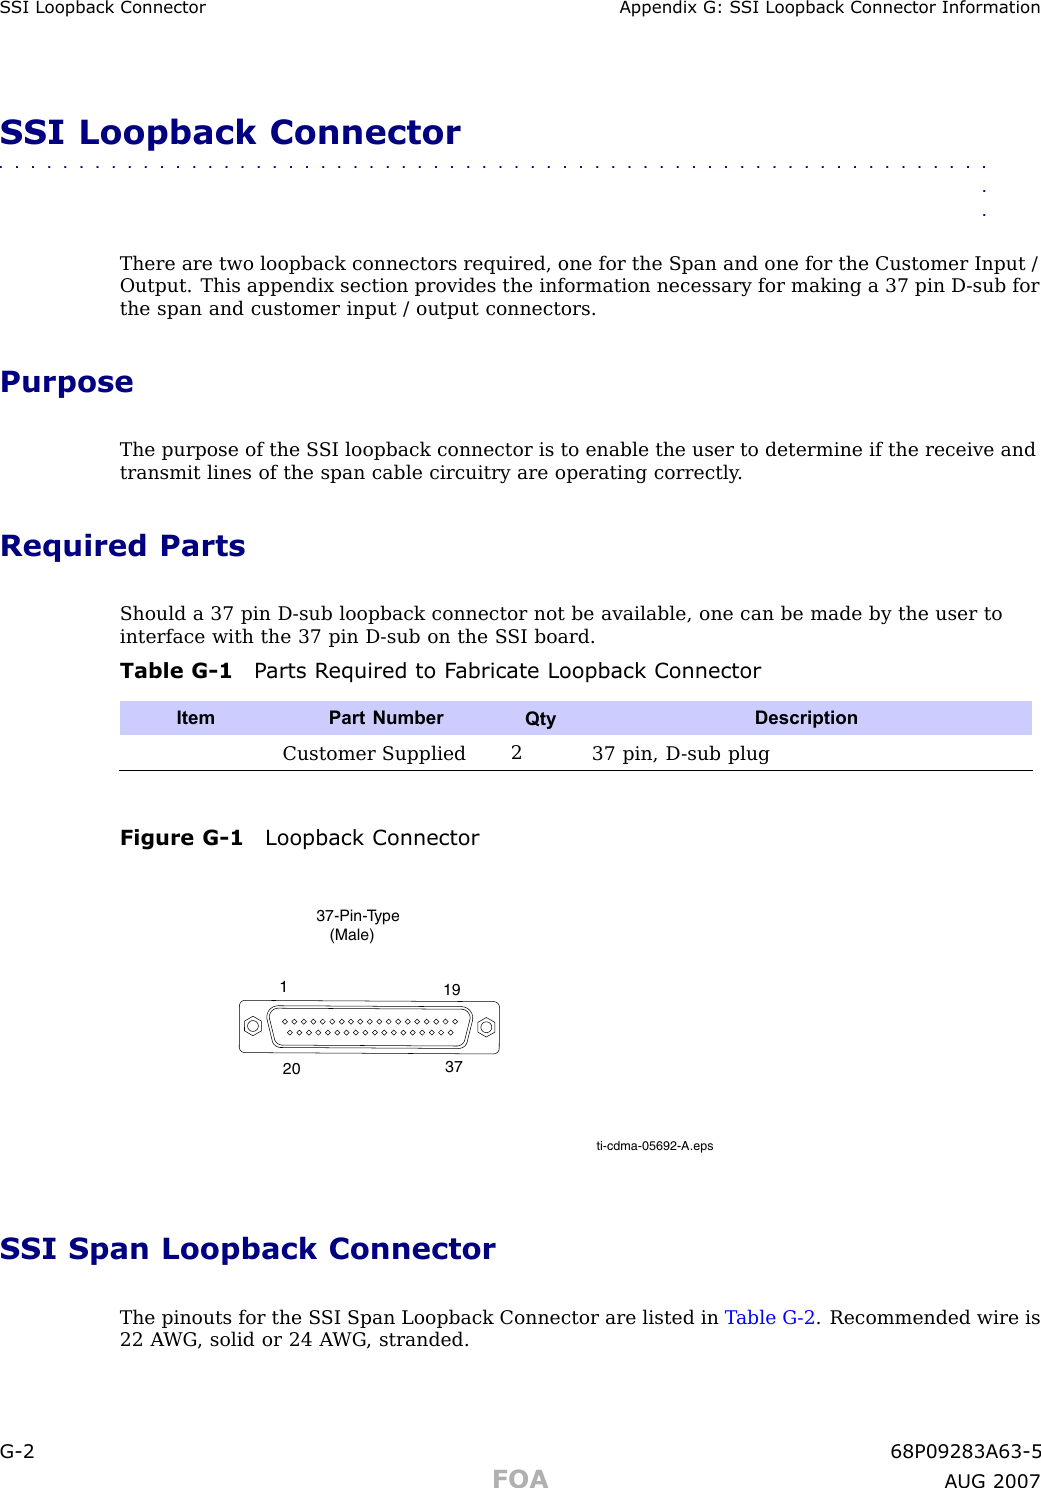 S SI Loopback Connector Appendix G: S SI Loopback Connector InformationSSI Loopback Connector■■■■■■■■■■■■■■■■■■■■■■■■■■■■■■■■■■■■■■■■■■■■■■■■■■■■■■■■■■■■■■■■There are two loopback connectors required, one for the Span and one for the Customer Input /Output. This appendix section provides the information necessary for making a 37 pin D -sub forthe span and customer input / output connectors.PurposeThe purpose of the S SI loopback connector is to enable the user to determine if the receive andtransmit lines of the span cable circuitry are operating correctly .Required PartsShould a 37 pin D -sub loopback connector not be available, one can be made by the user tointerface with the 37 pin D -sub on the S SI board.Table G -1 P arts R equired to F abricate Loopback ConnectorItem Part NumberQtyDescriptionCustomer Supplied237 pin, D -sub plugFigure G -1 Loopback Connectorti-cdma-05692-A.eps37-Pin-Type   (Male)1193720SSI Span Loopback ConnectorThe pinouts for the S SI Span Loopback Connector are listed in T able G -2 . Recommended wire is22 A WG , solid or 24 A WG , stranded.G -2 68P09283A63 -5FOA A UG 2007